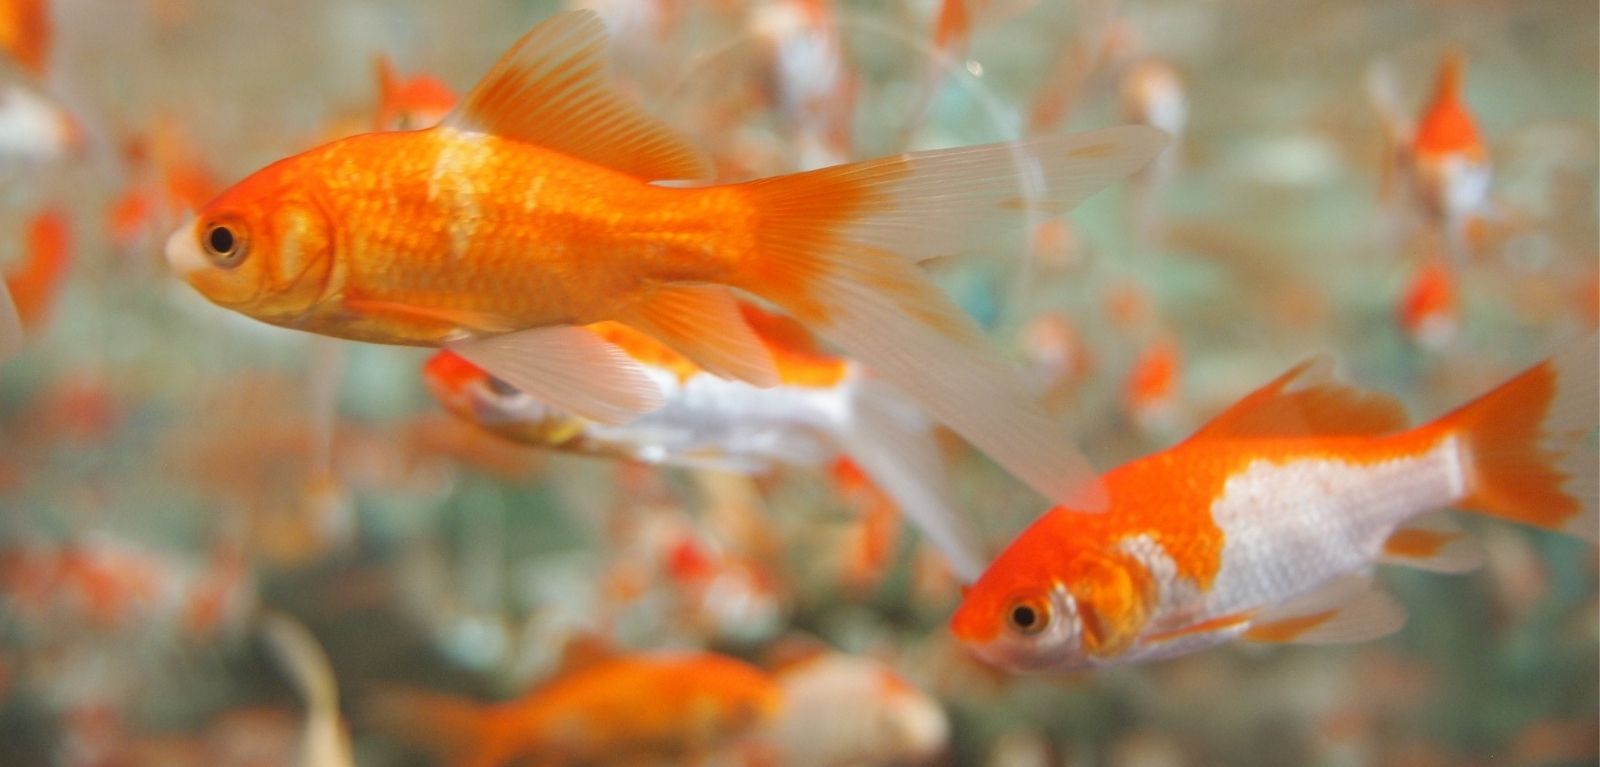 Pets or threats? Goldfish might be harmful for biodiversity